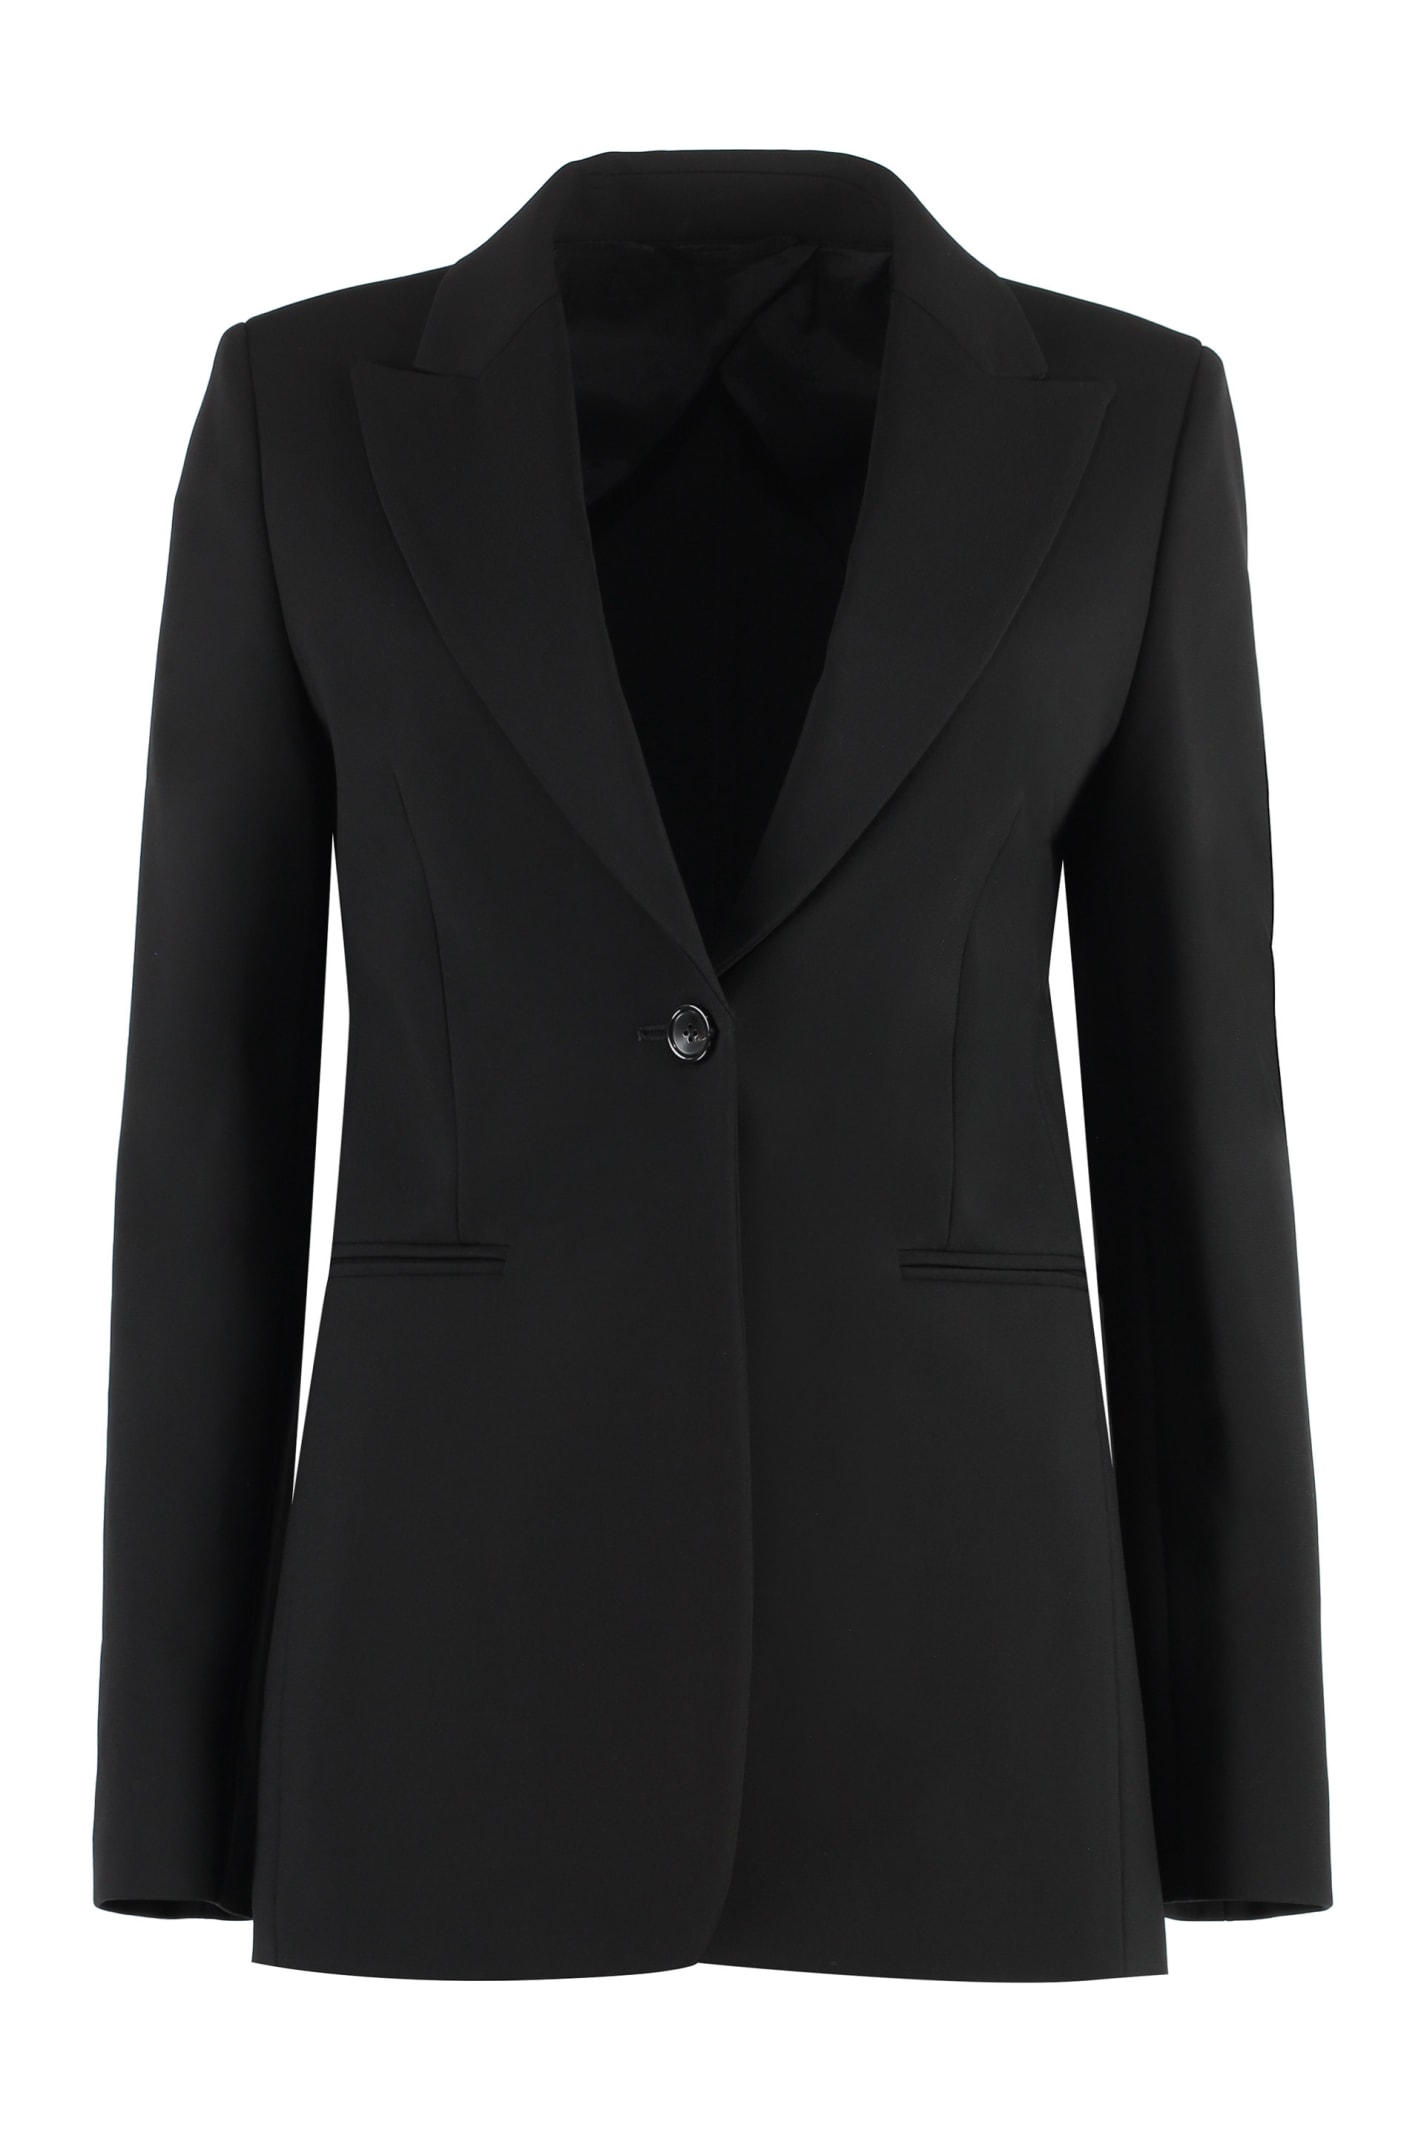 MAX MARA CIRCEO SINGLE-BREASTED ONE BUTTON JACKET